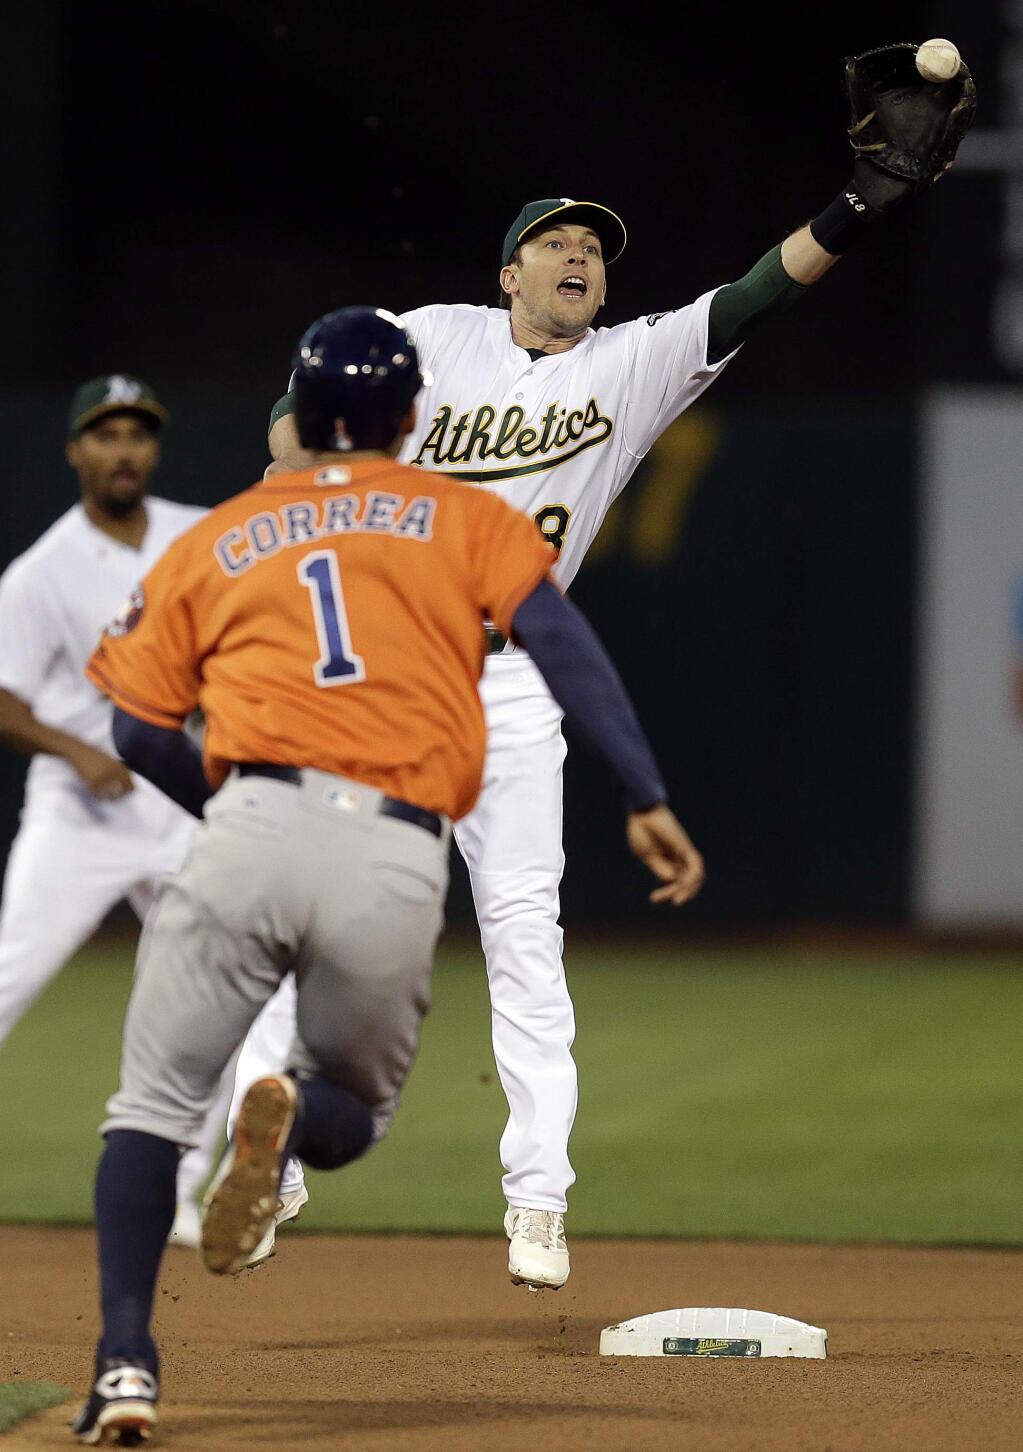 Oakland Athletics' Jed Lowrie, right, can't make the catch on the ball as Houston Astros' Carlos Correa (1) prepares to steal second base in the fourth inning of a baseball game Friday, April 29, 2016, in Oakland, Calif. (AP Photo/Ben Margot)